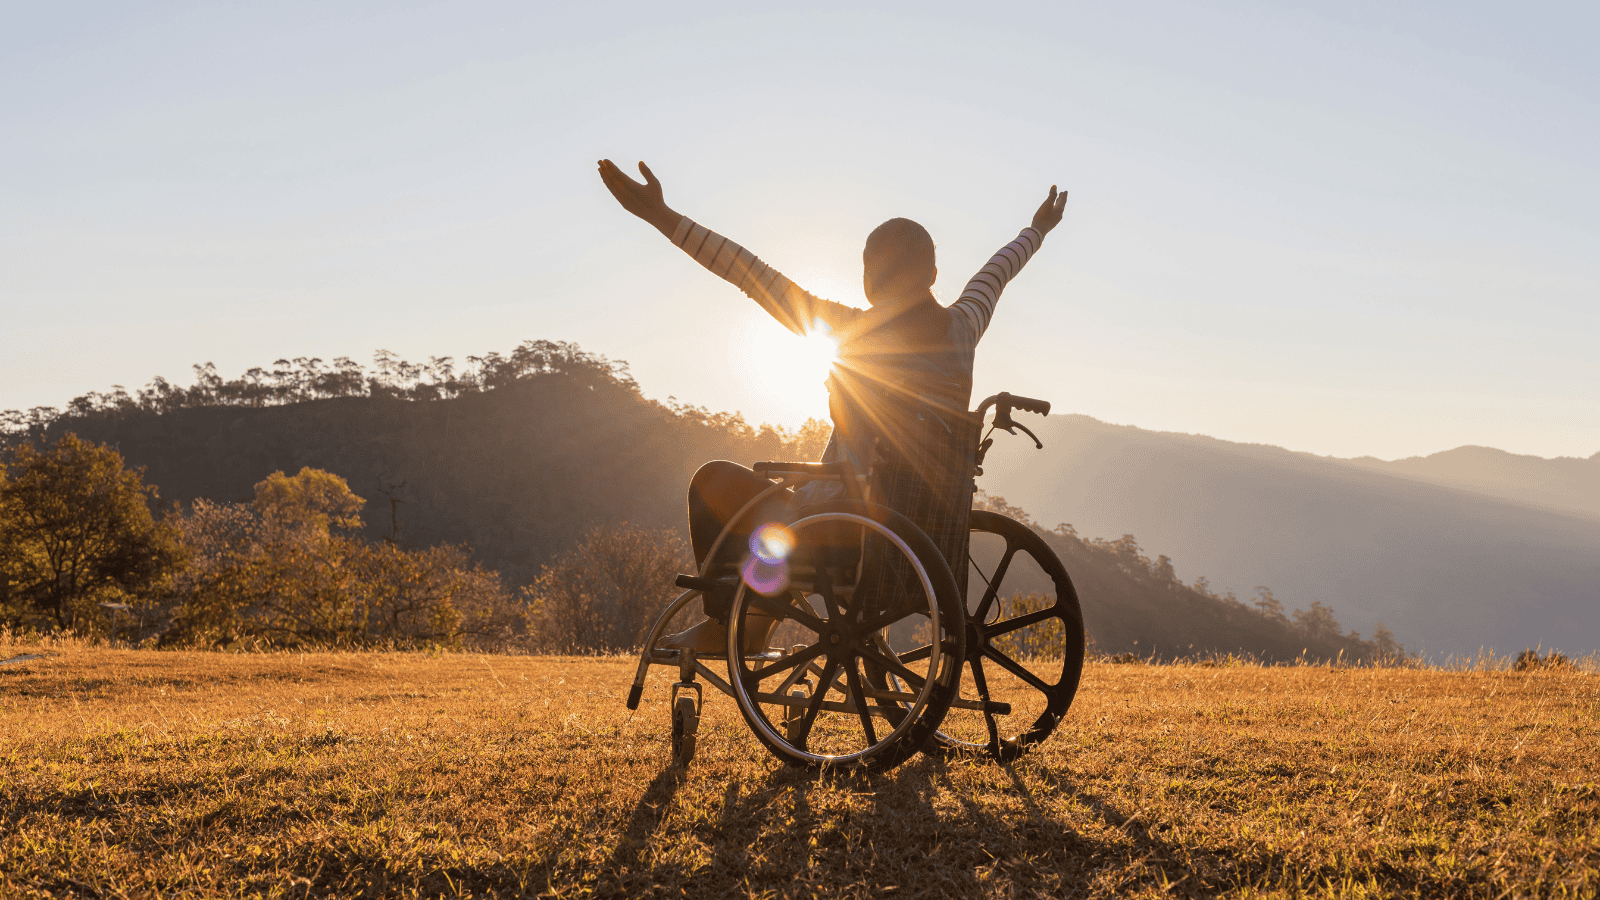 <p>Traveling with a disability can be intimidating. However, many destinations worldwide prioritize accessibility to welcome visitors of all backgrounds and mobility levels.</p><p><a href="https://whatthefab.com/accessible-travel-destinations.html" rel="follow"><strong>15 Accessible Destinations That Make Traveling With a Disability Easy</strong></a></p><p><em>Select images provided by <a href="https://depositphotos.com/" rel="nofollow external noopener noreferrer">Depositphotos</a>.</em></p>